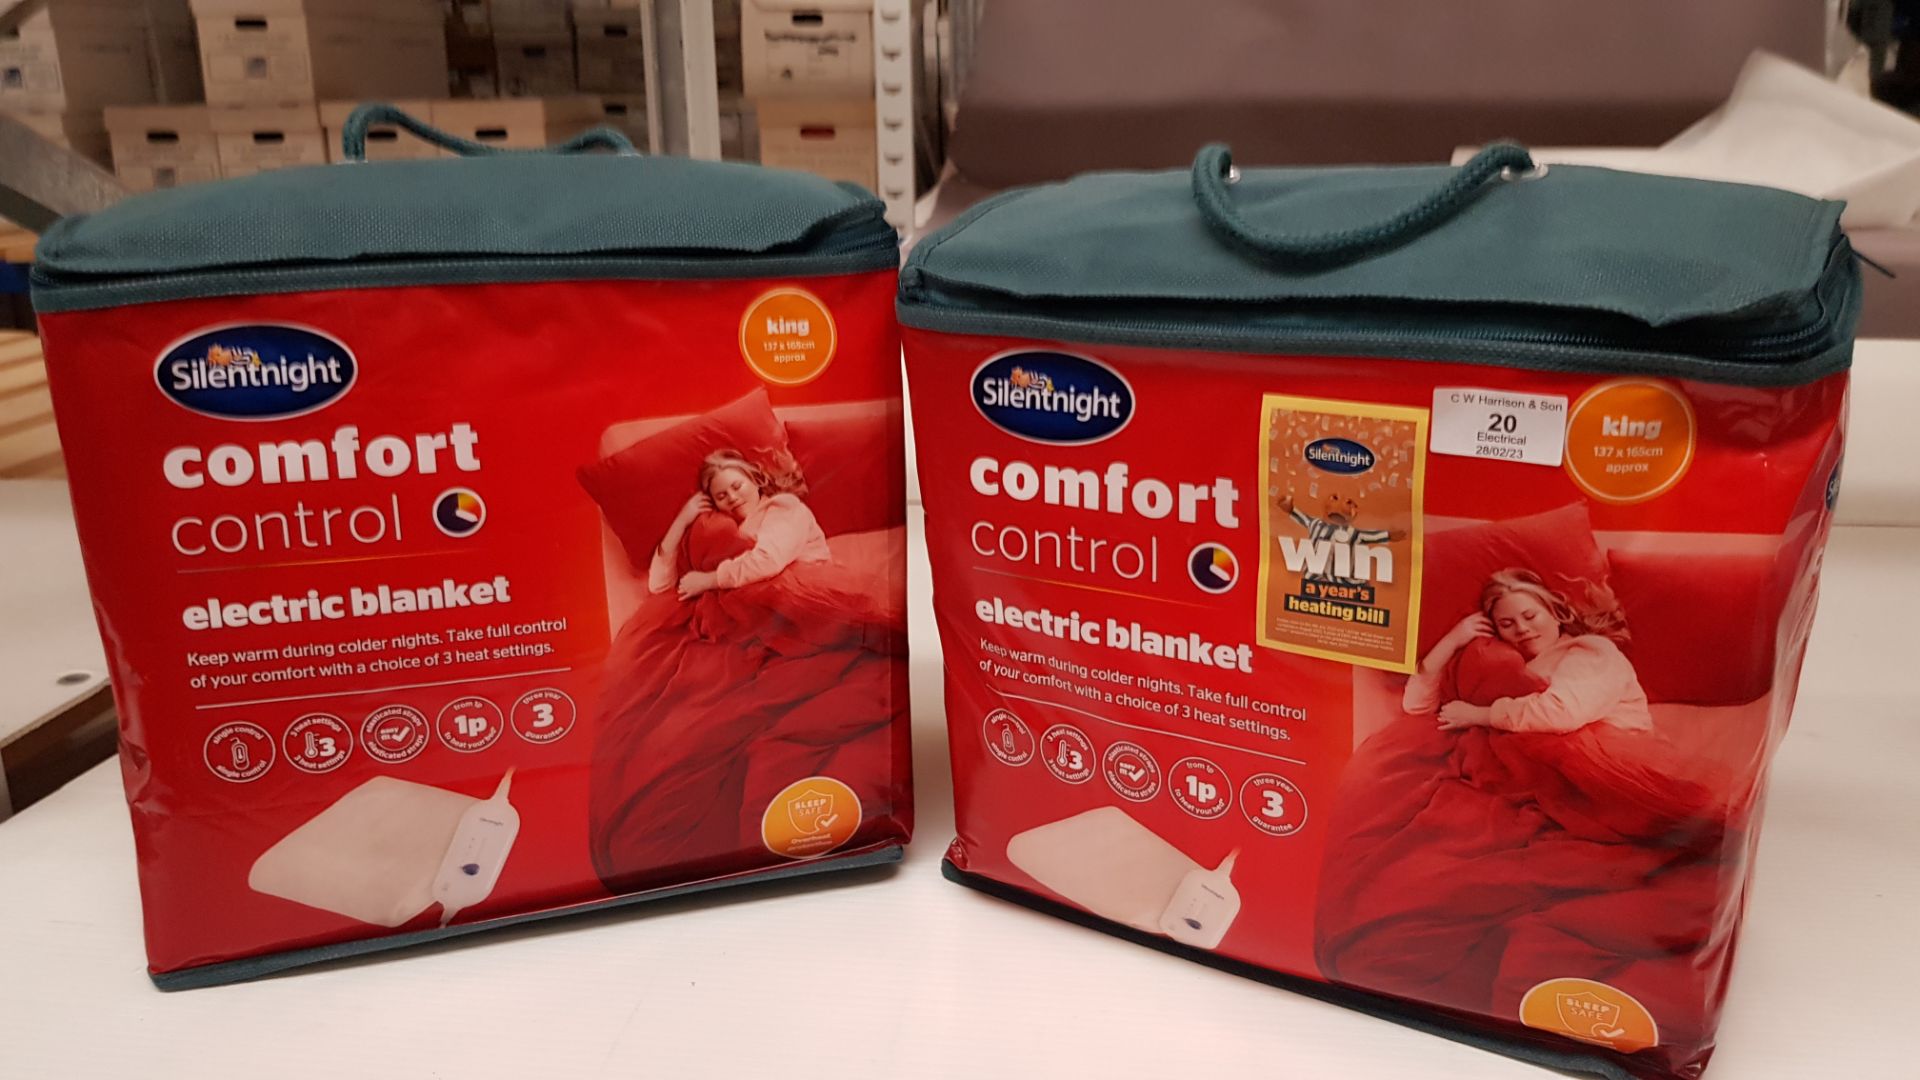 2x Silentnight Comfort Control Electric Blanket King. RRP £55 Each. - Image 2 of 3